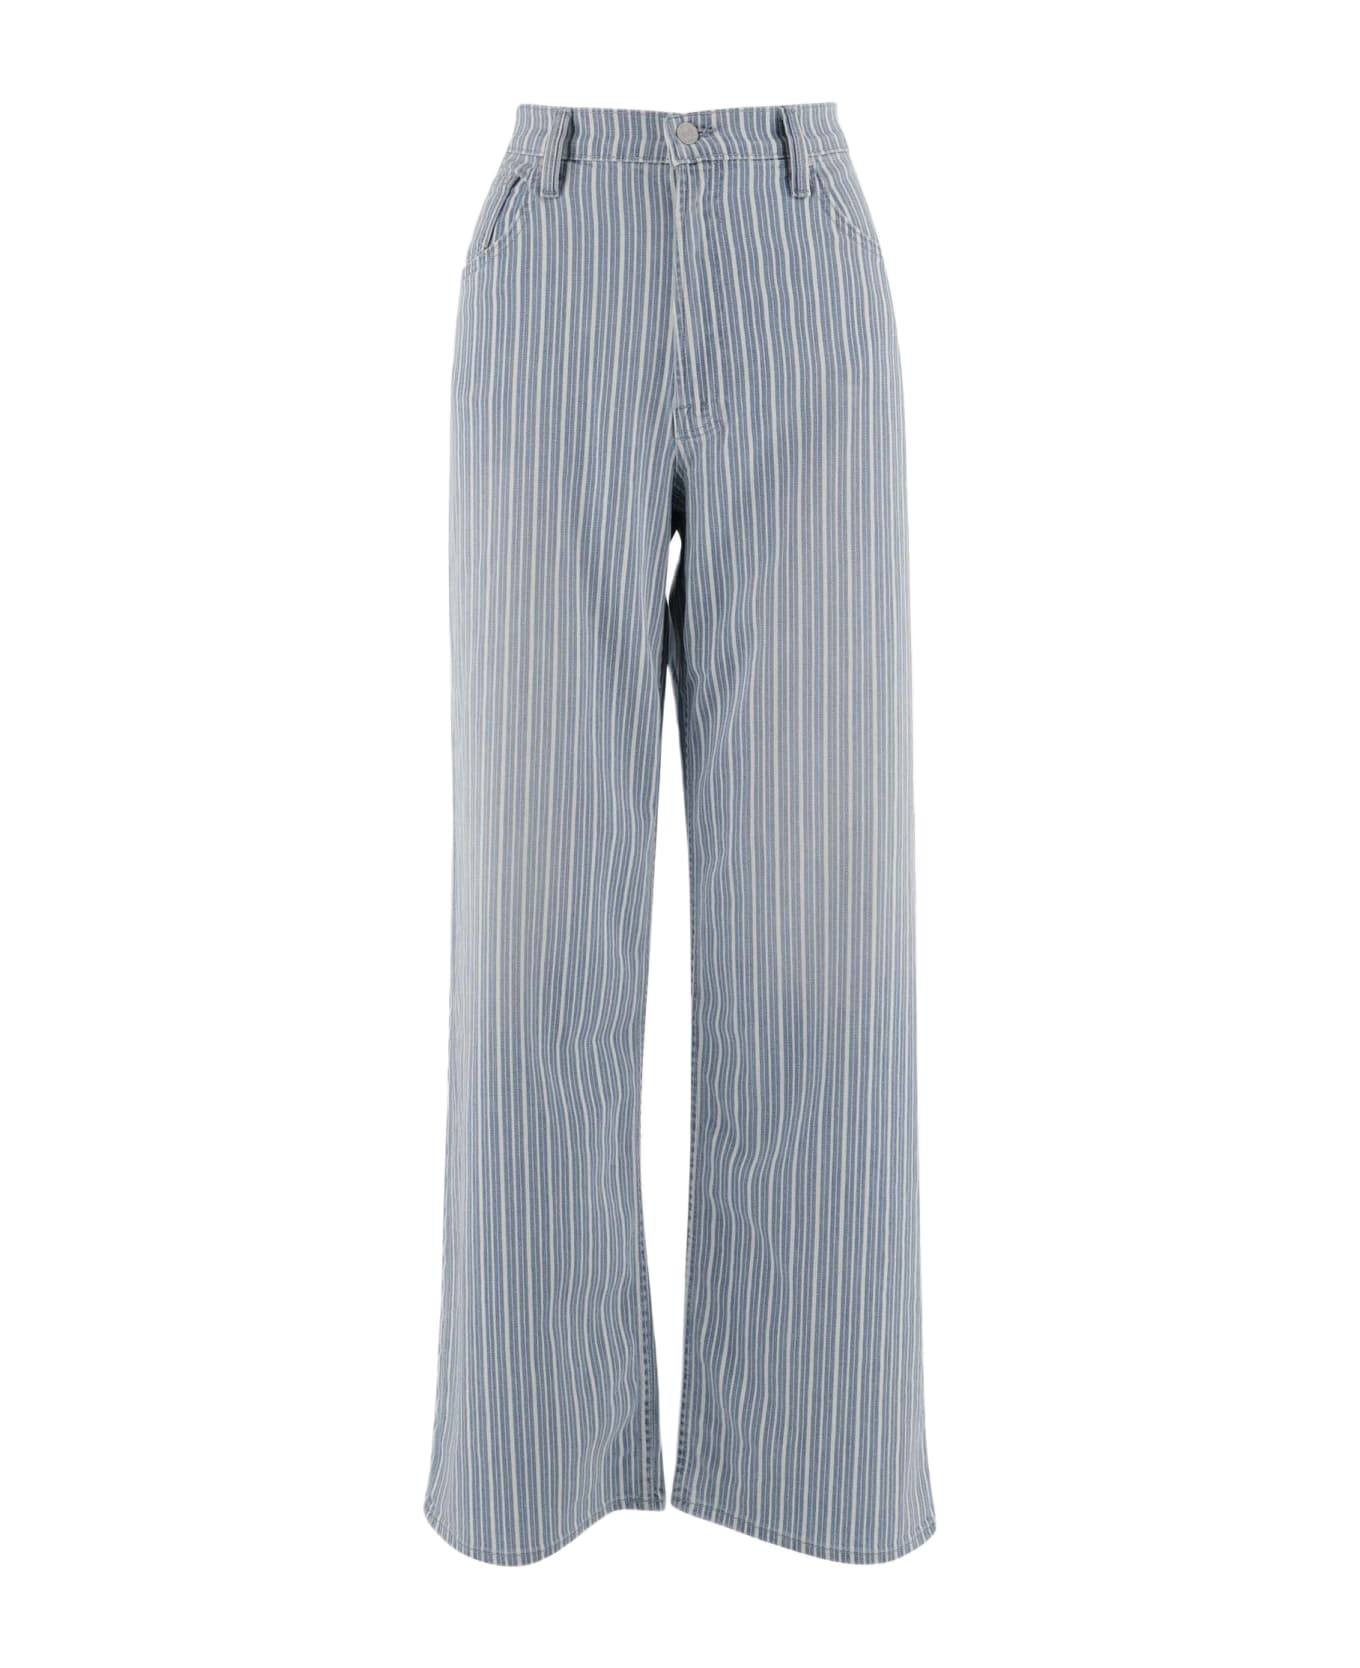 Mother Stretch Cotton Striped Flared Jeans - Denim